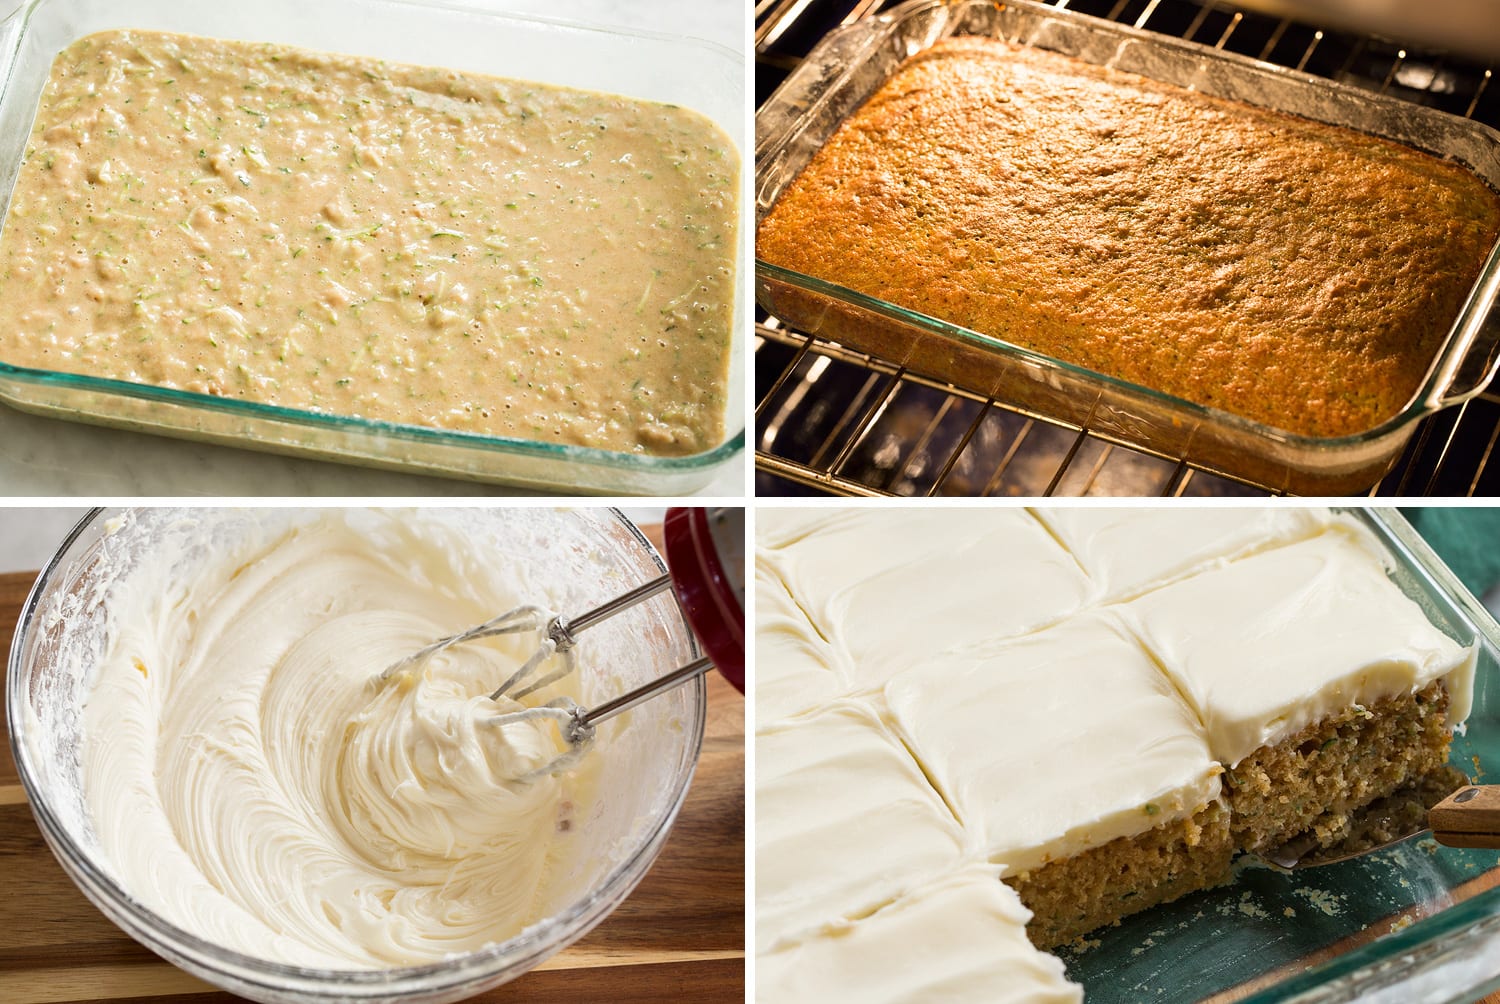 Baking zucchini cake and topping with frosting.